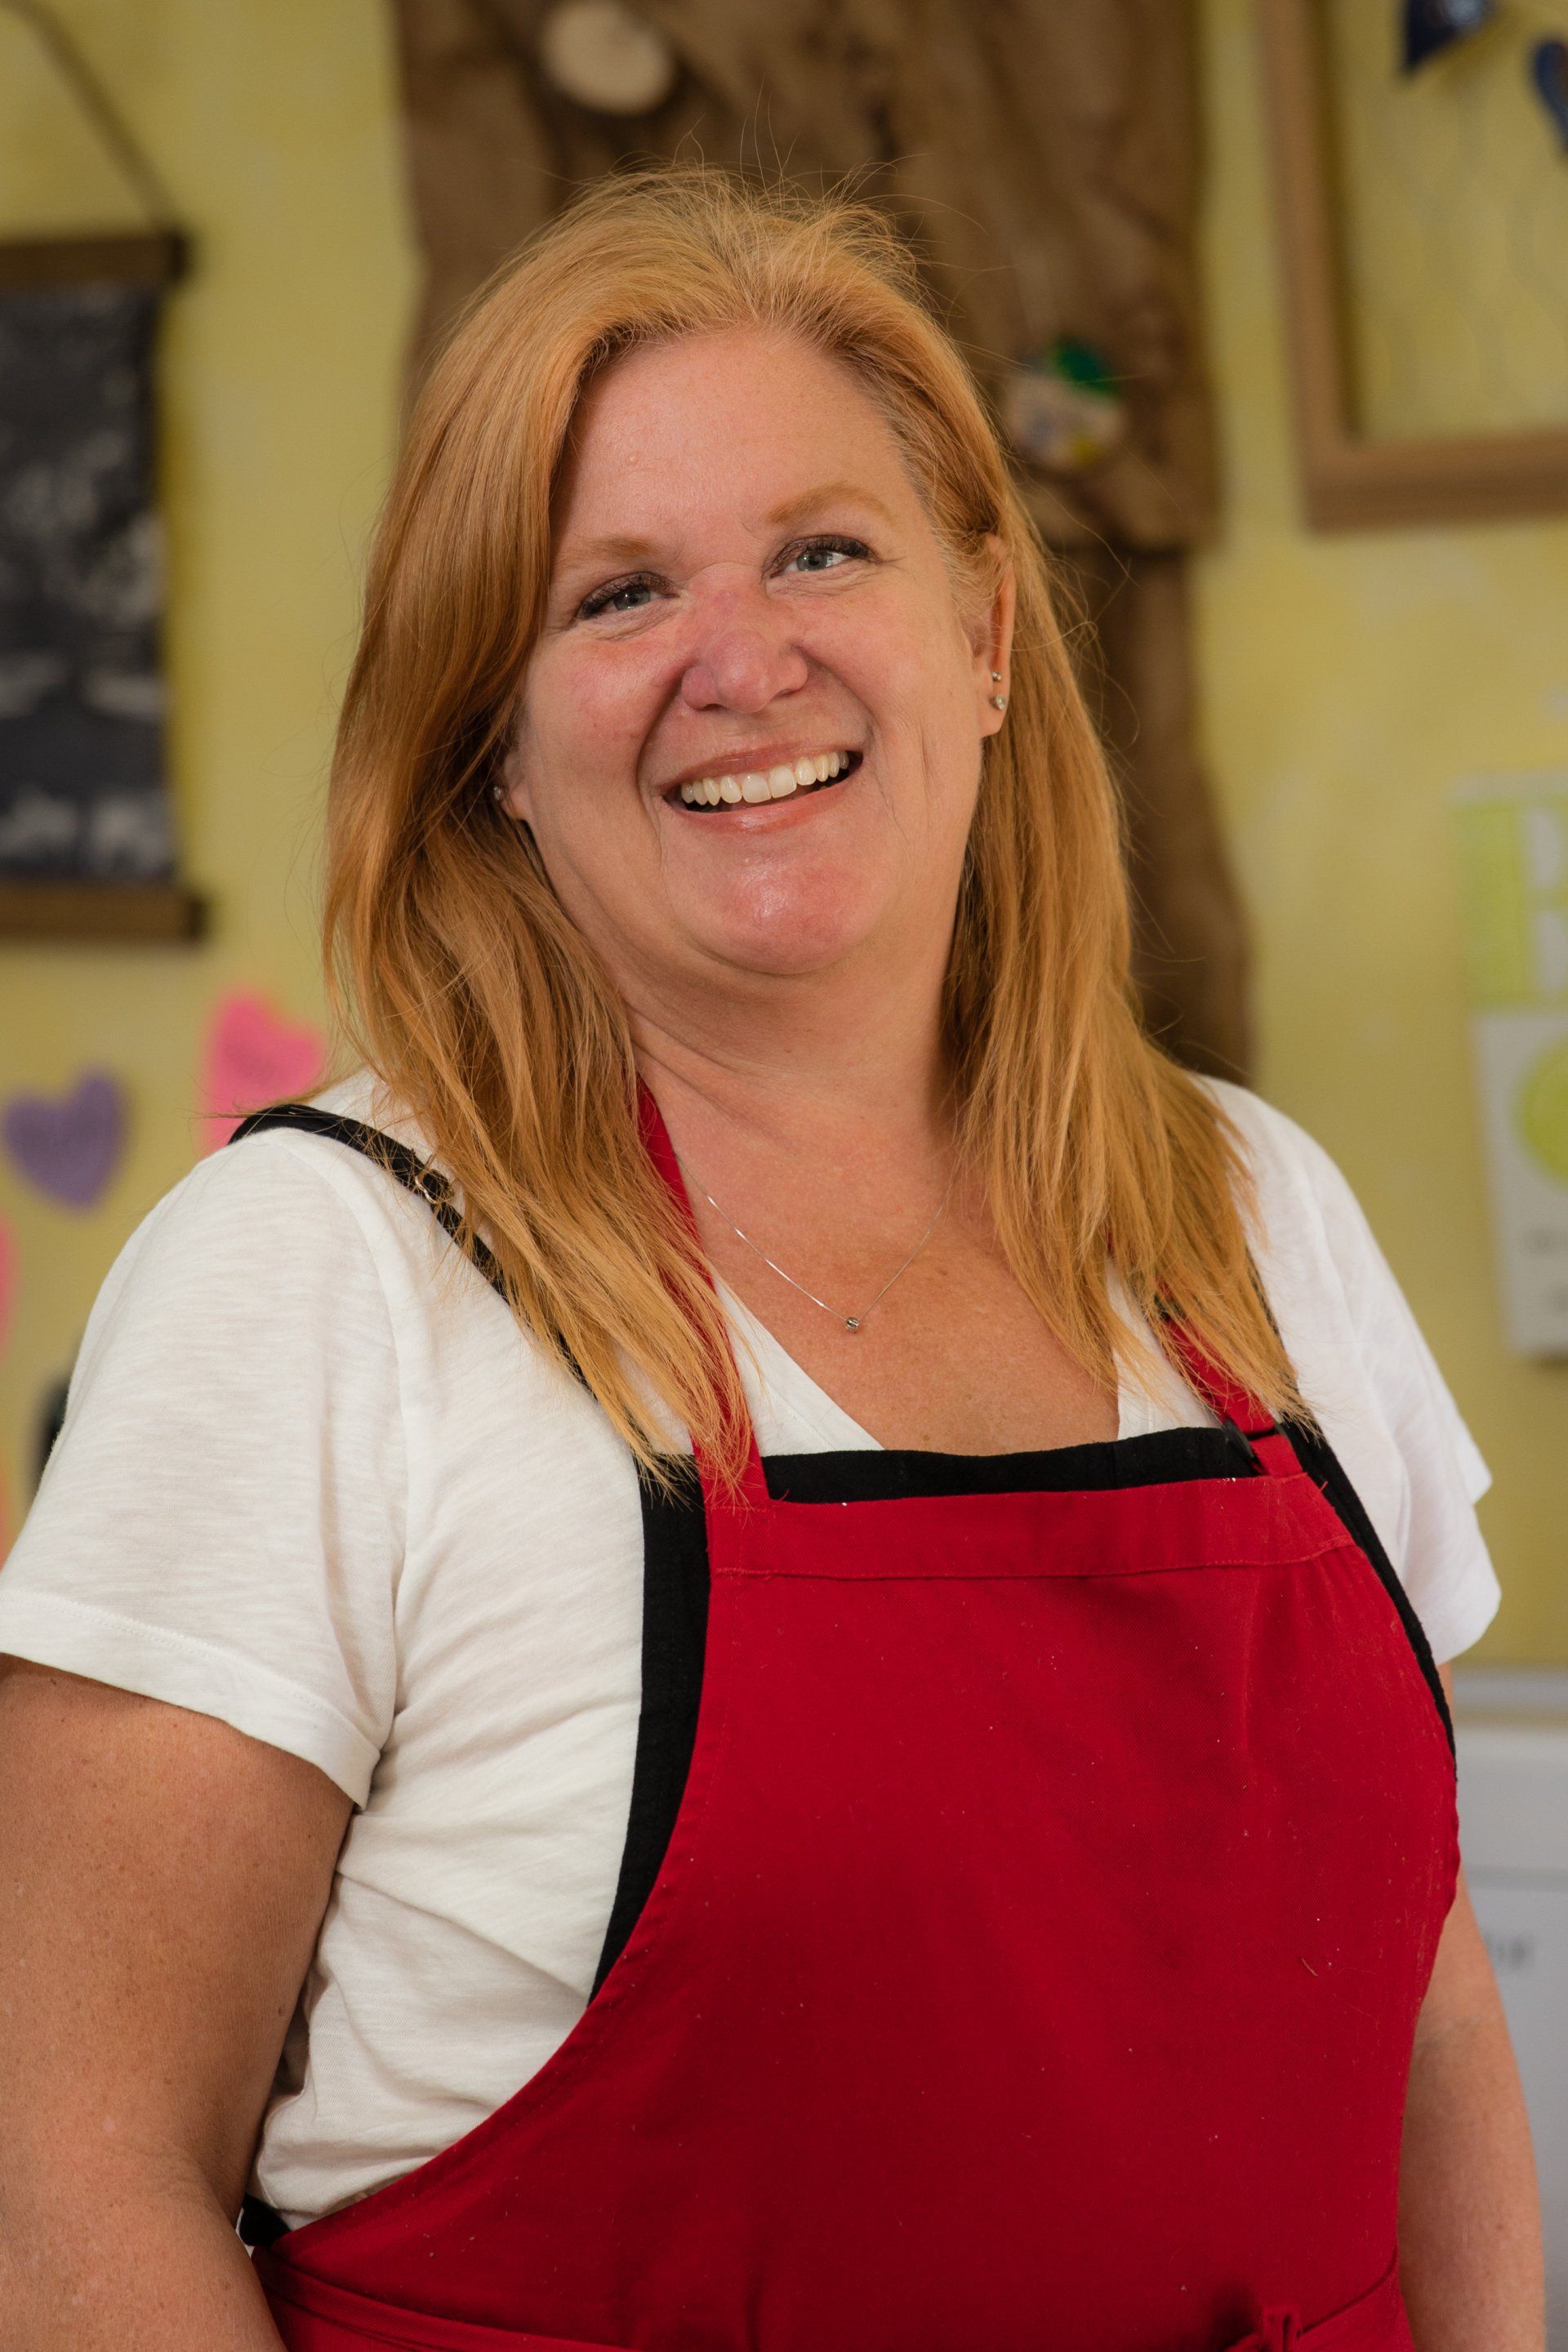 A woman wearing a red apron and a white shirt is smiling.